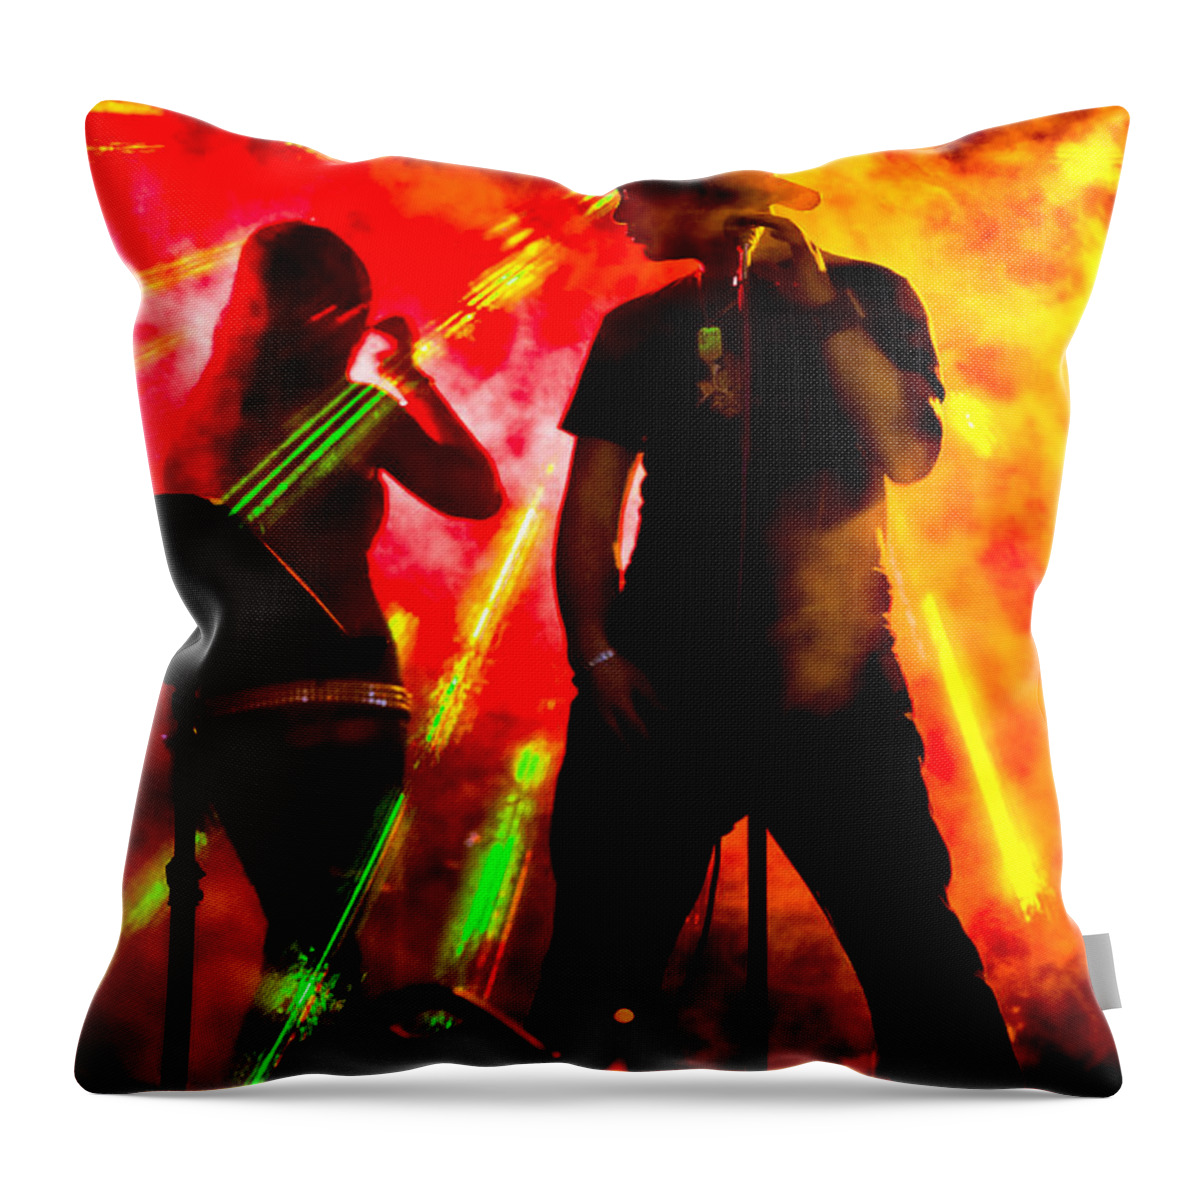 Band Throw Pillow featuring the photograph Explosion by Christopher Holmes